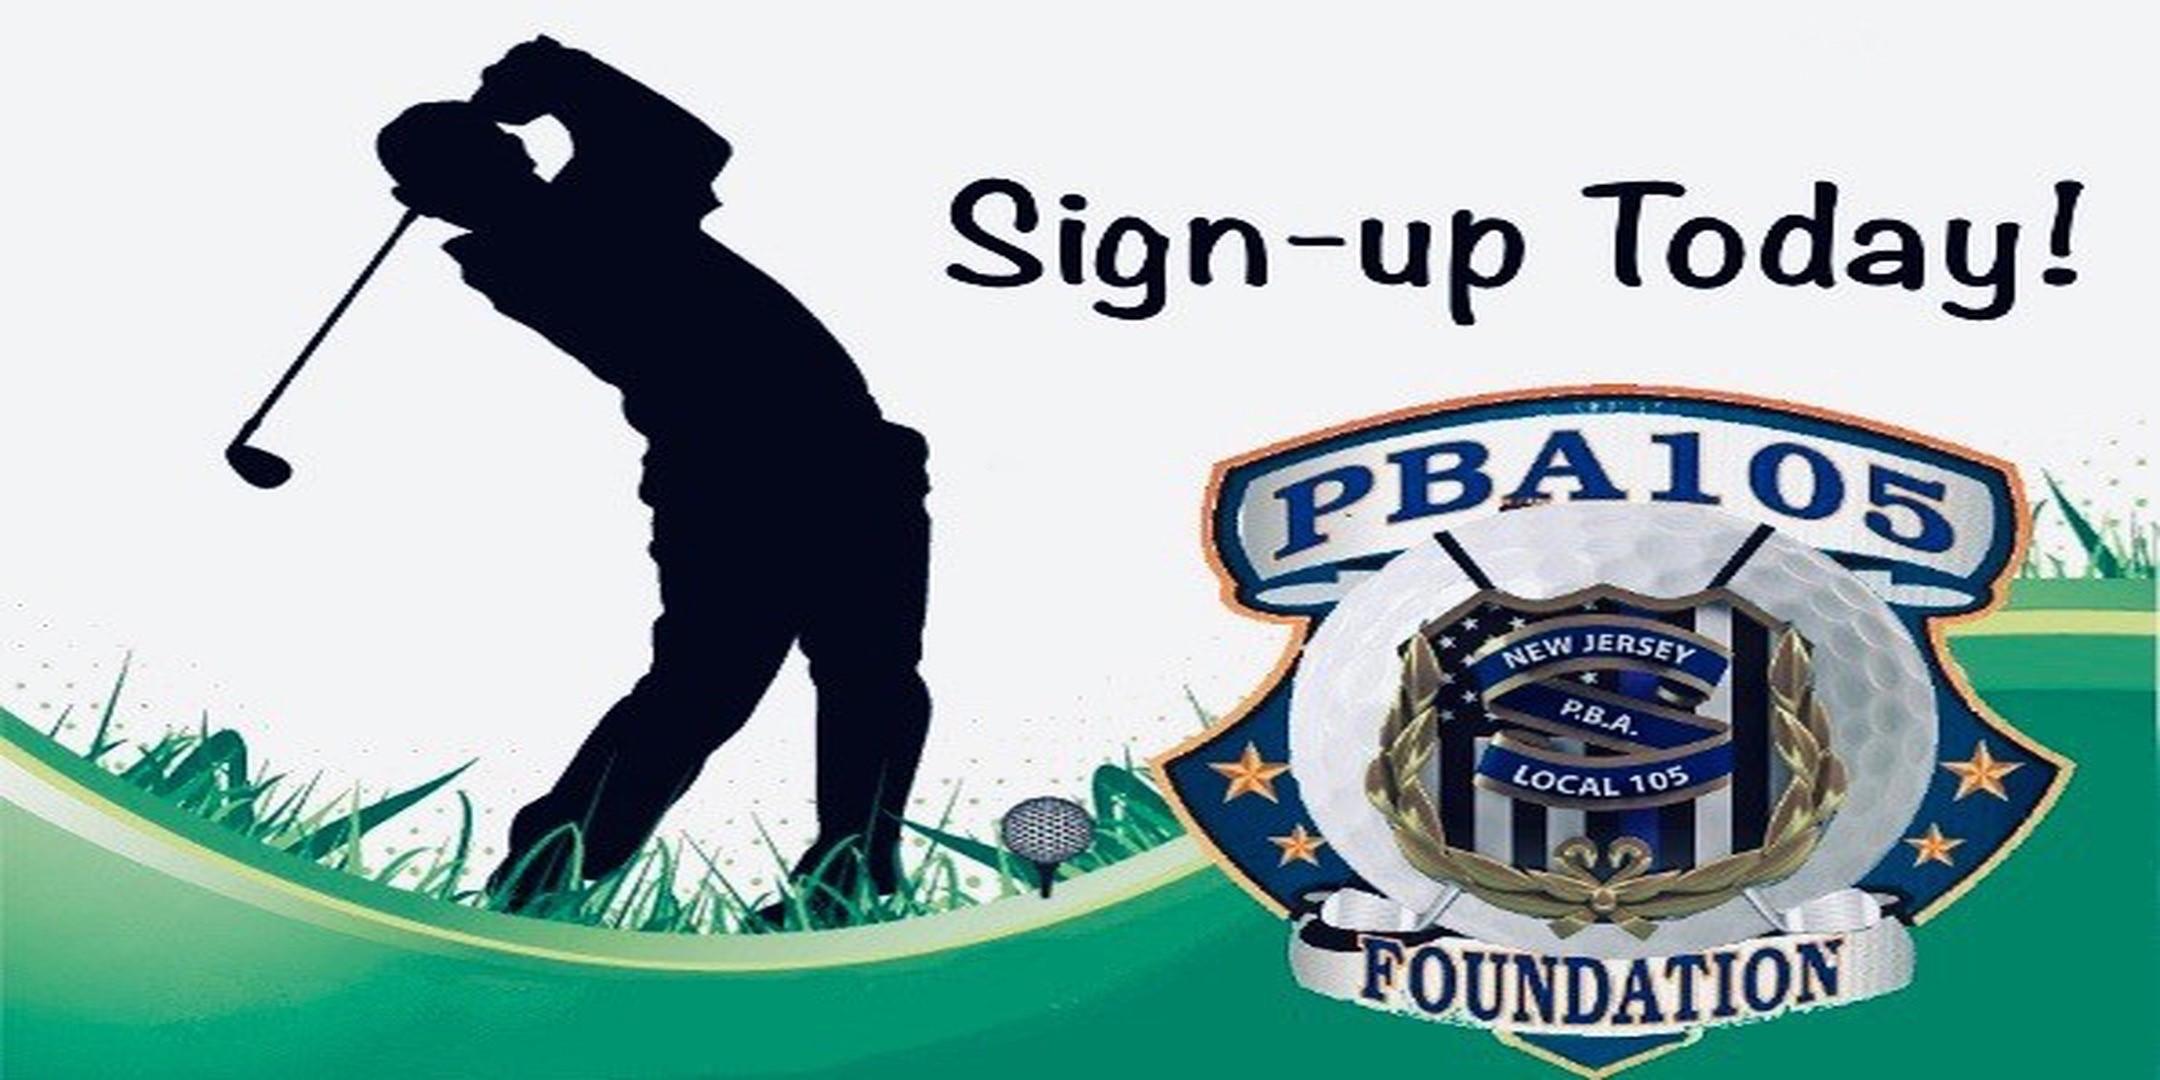 PBA 105's Foundation Golf Outing